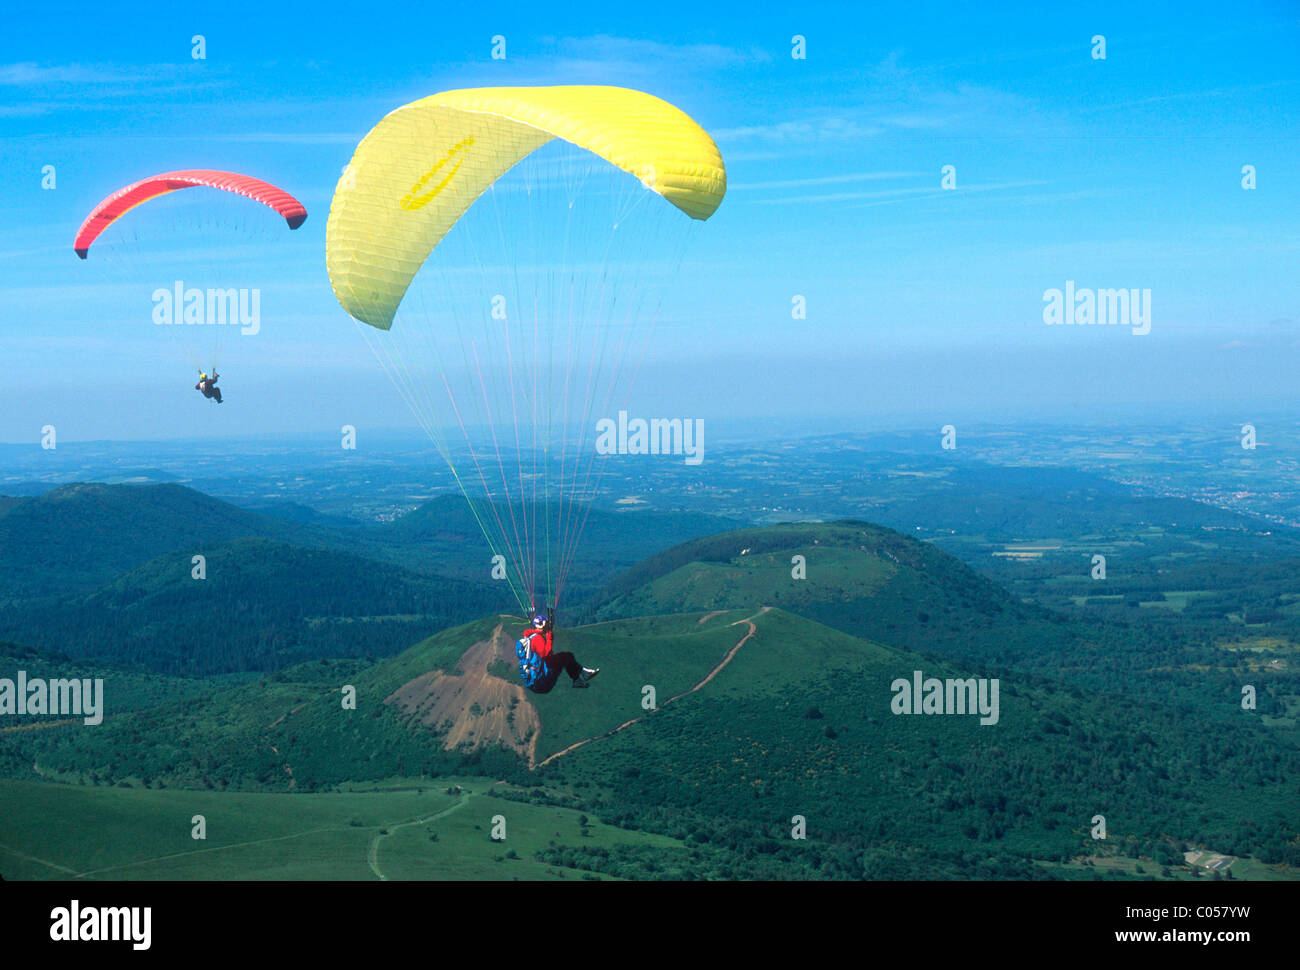 Hang gliding near the Puy de Dome volcano in Auvergne, France. Stock Photo